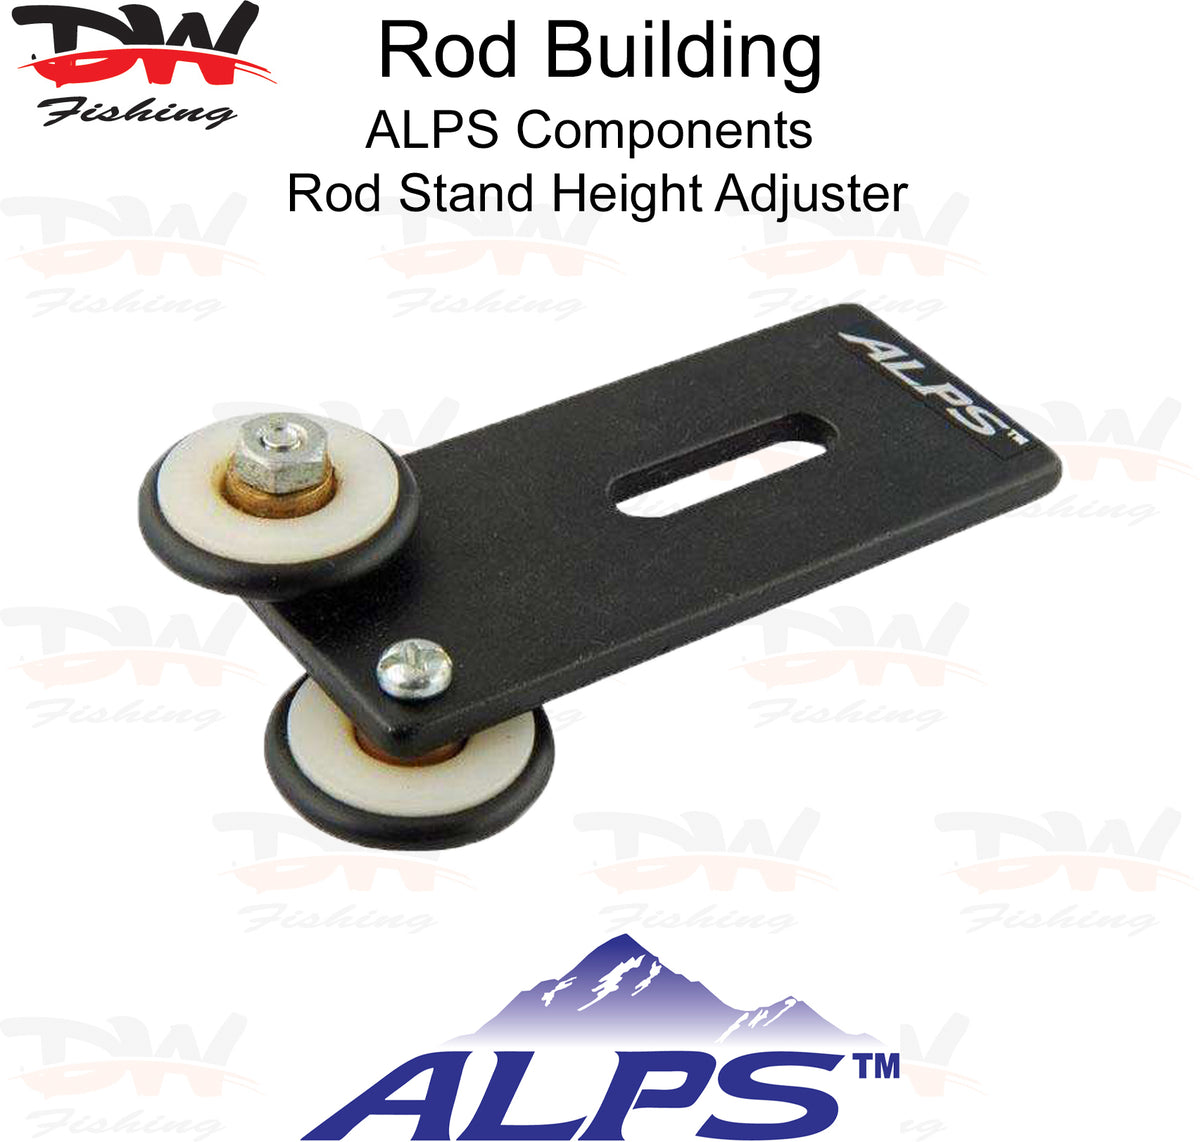 ALPS Rod Wrapper Accessories | Rod Building | Daves Tackle Bag